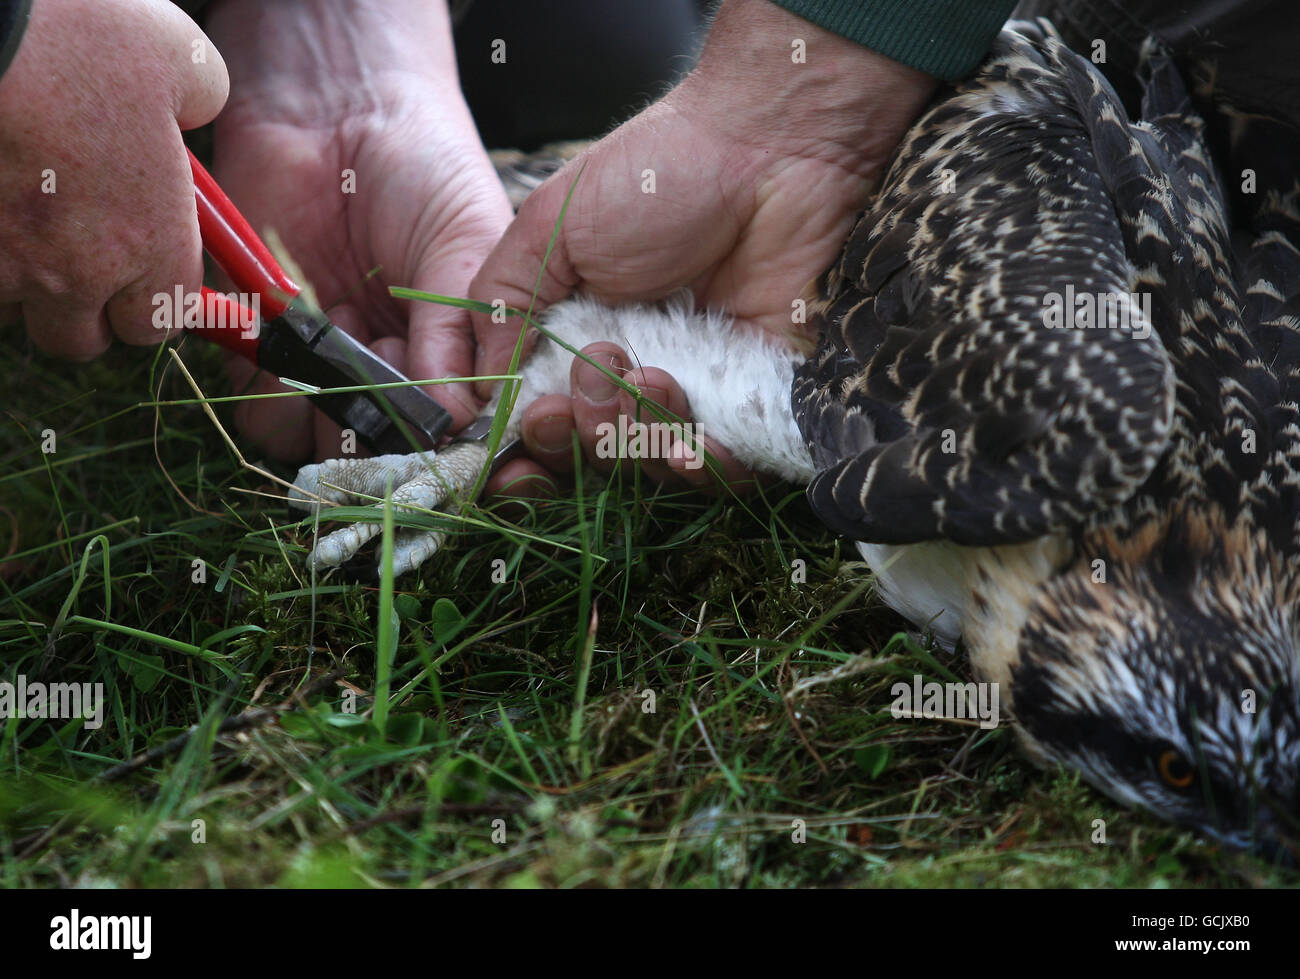 Ronnie Graham helps ring two osprey chicks hatched in the last few months at the Tweed Valley Osprey Centre, near Peebles in Scotland. Stock Photo